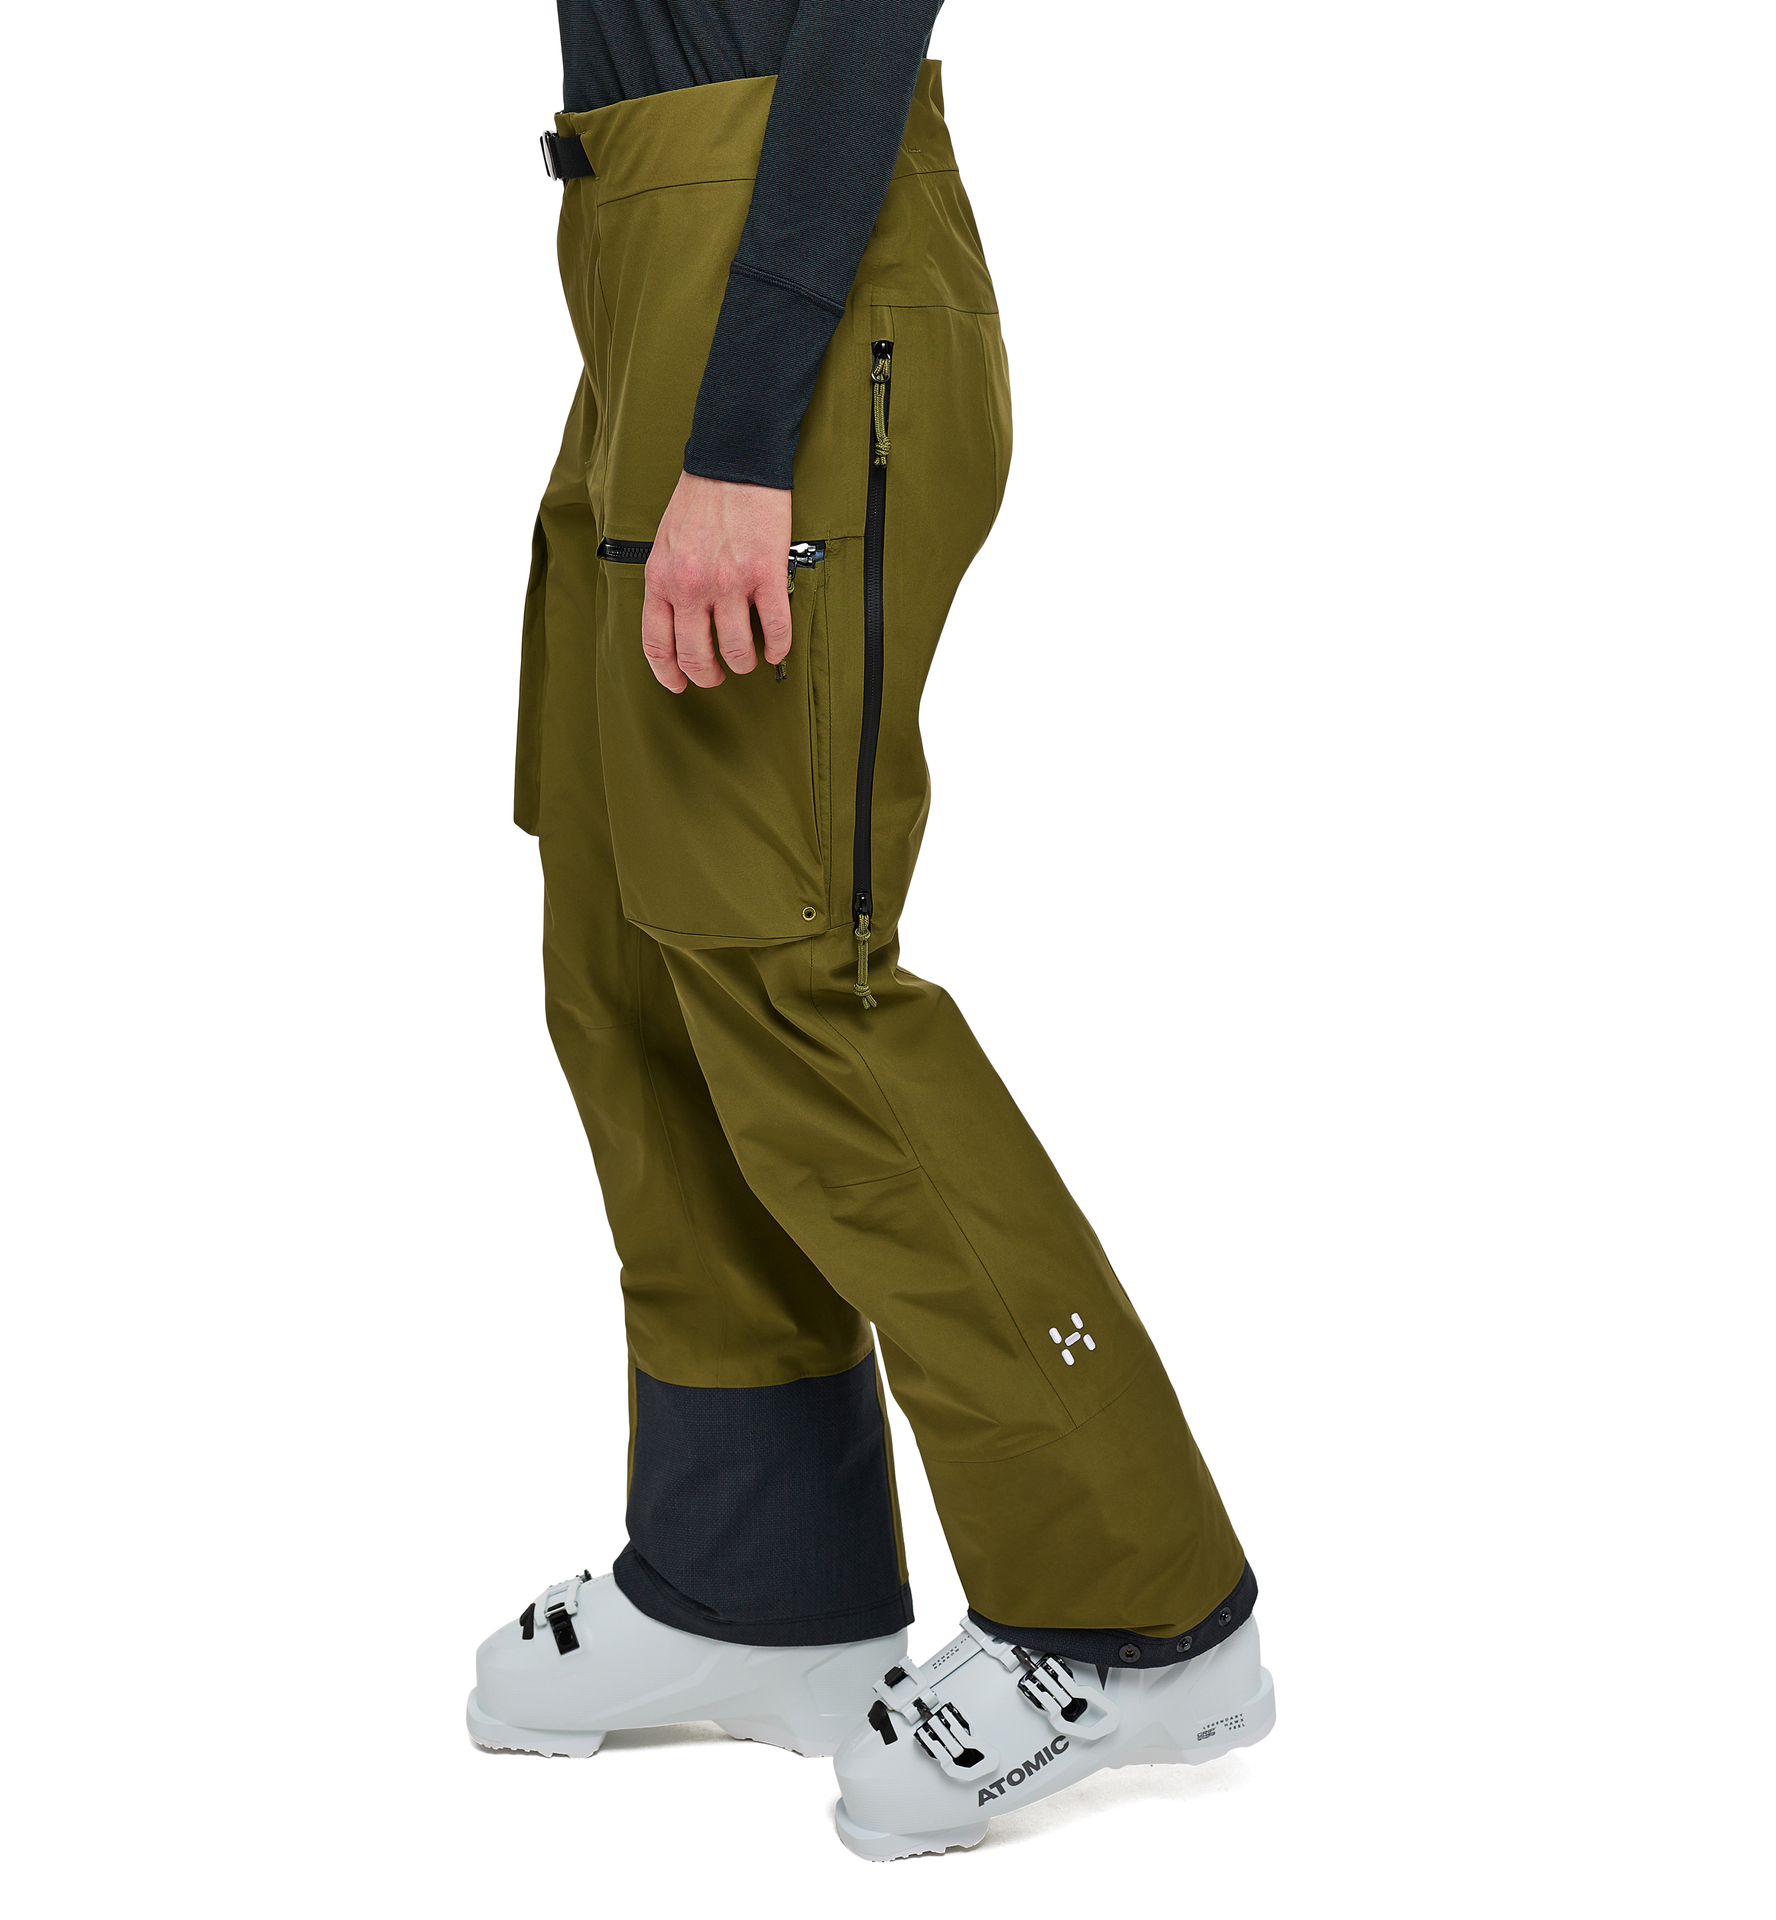 Vassi GTX Pant Women, Golden Brown, Trousers, Shell trousers, Trousers, Shorts, Activities, Waterproof trousers, Women, Ski, Snowboarding, Activities, Windproof trousers, Trousers, Pullovers-Shorts, Trousers, Shorts, Bottoms